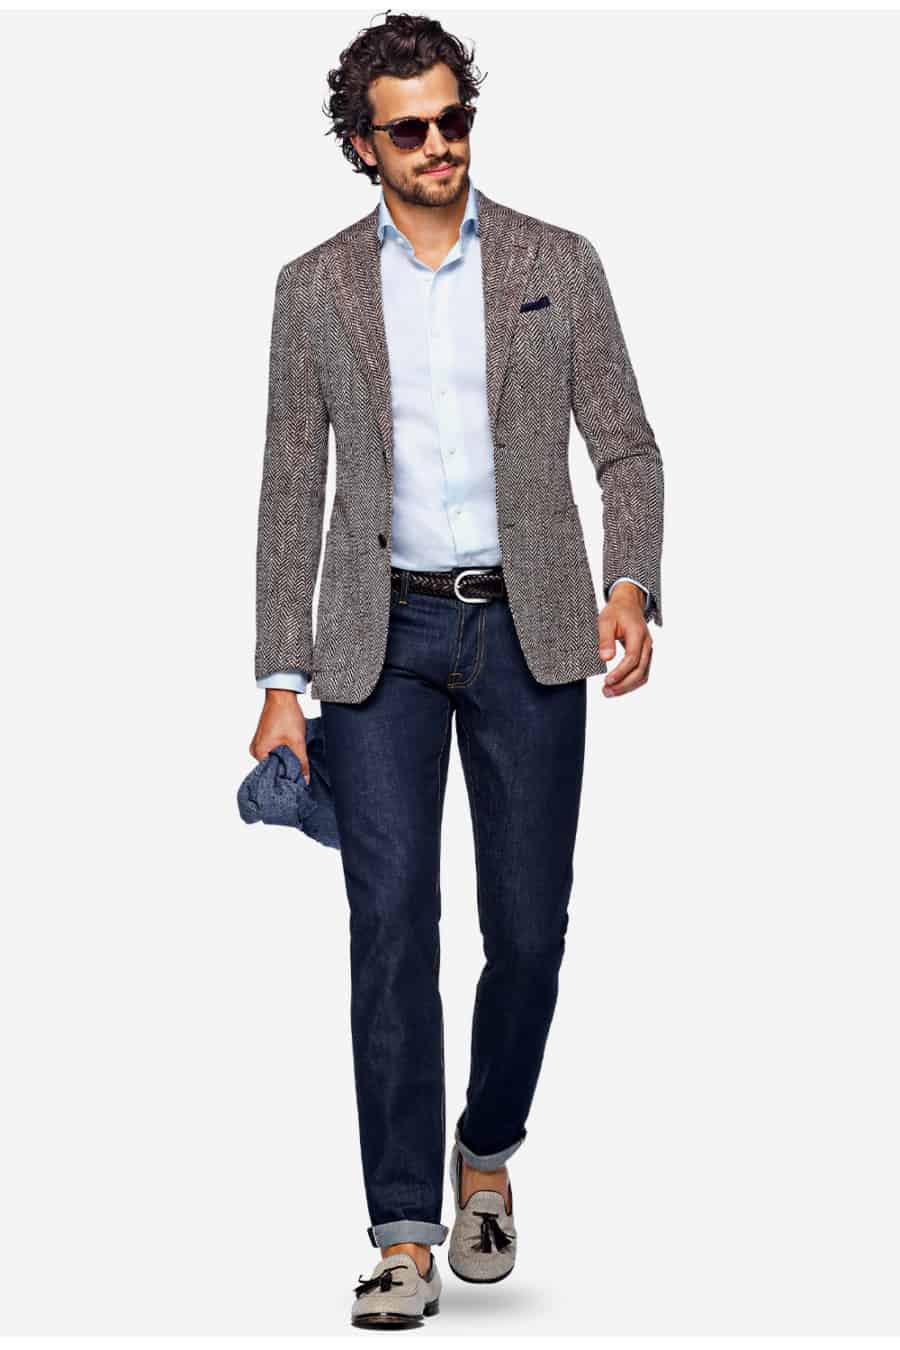 Men's herringbone blazer, raw denim jeans, blue shirt and loafers outfit